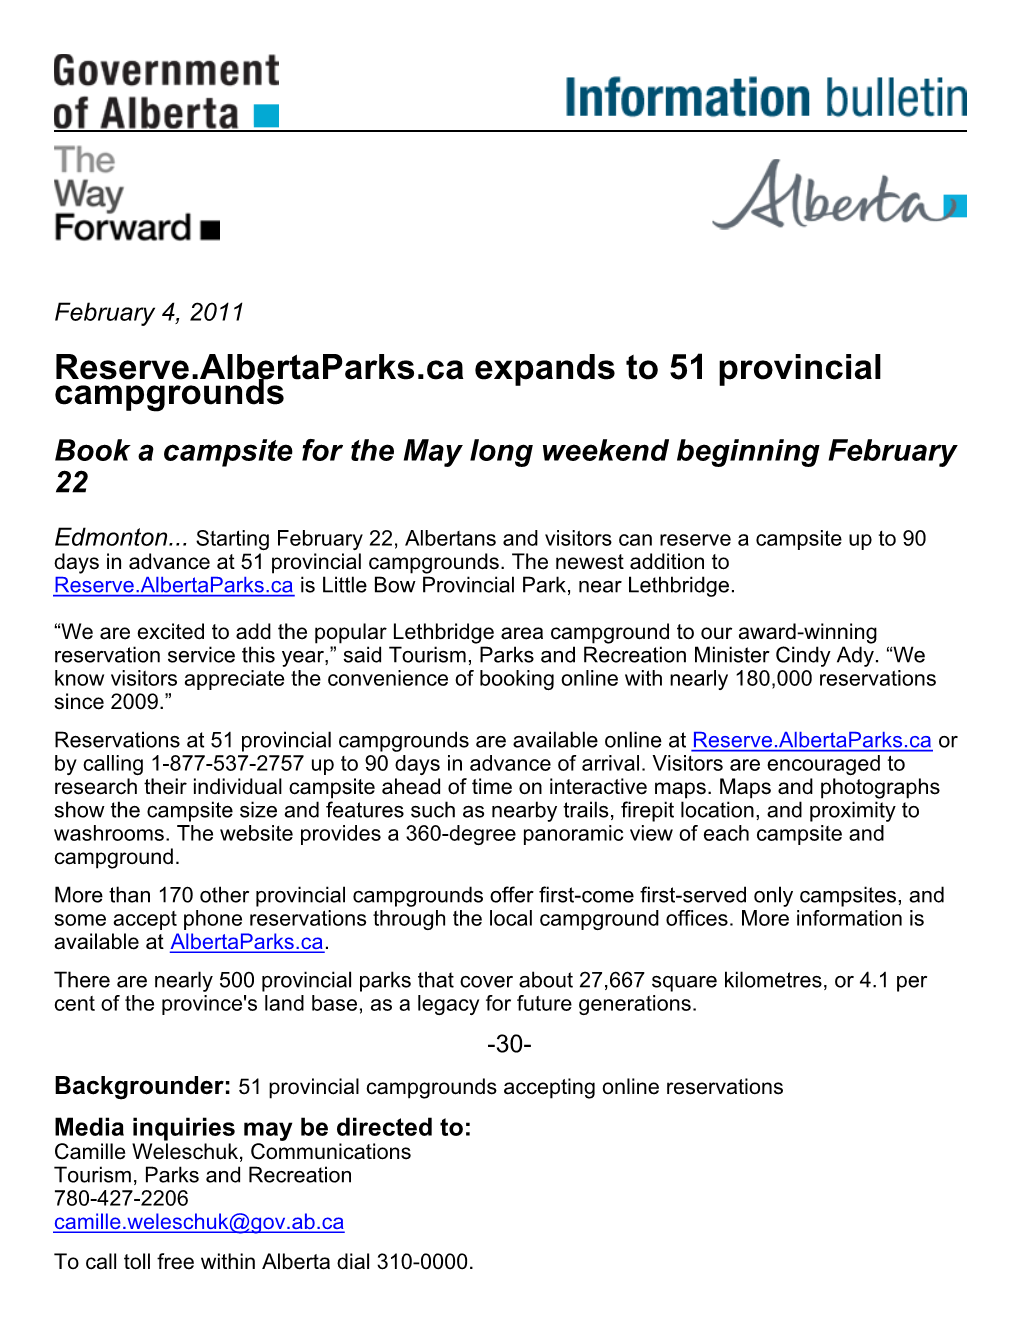 Reserve.Albertaparks.Ca Expands to 51 Provincial Campgrounds Book a Campsite for the May Long Weekend Beginning February 22